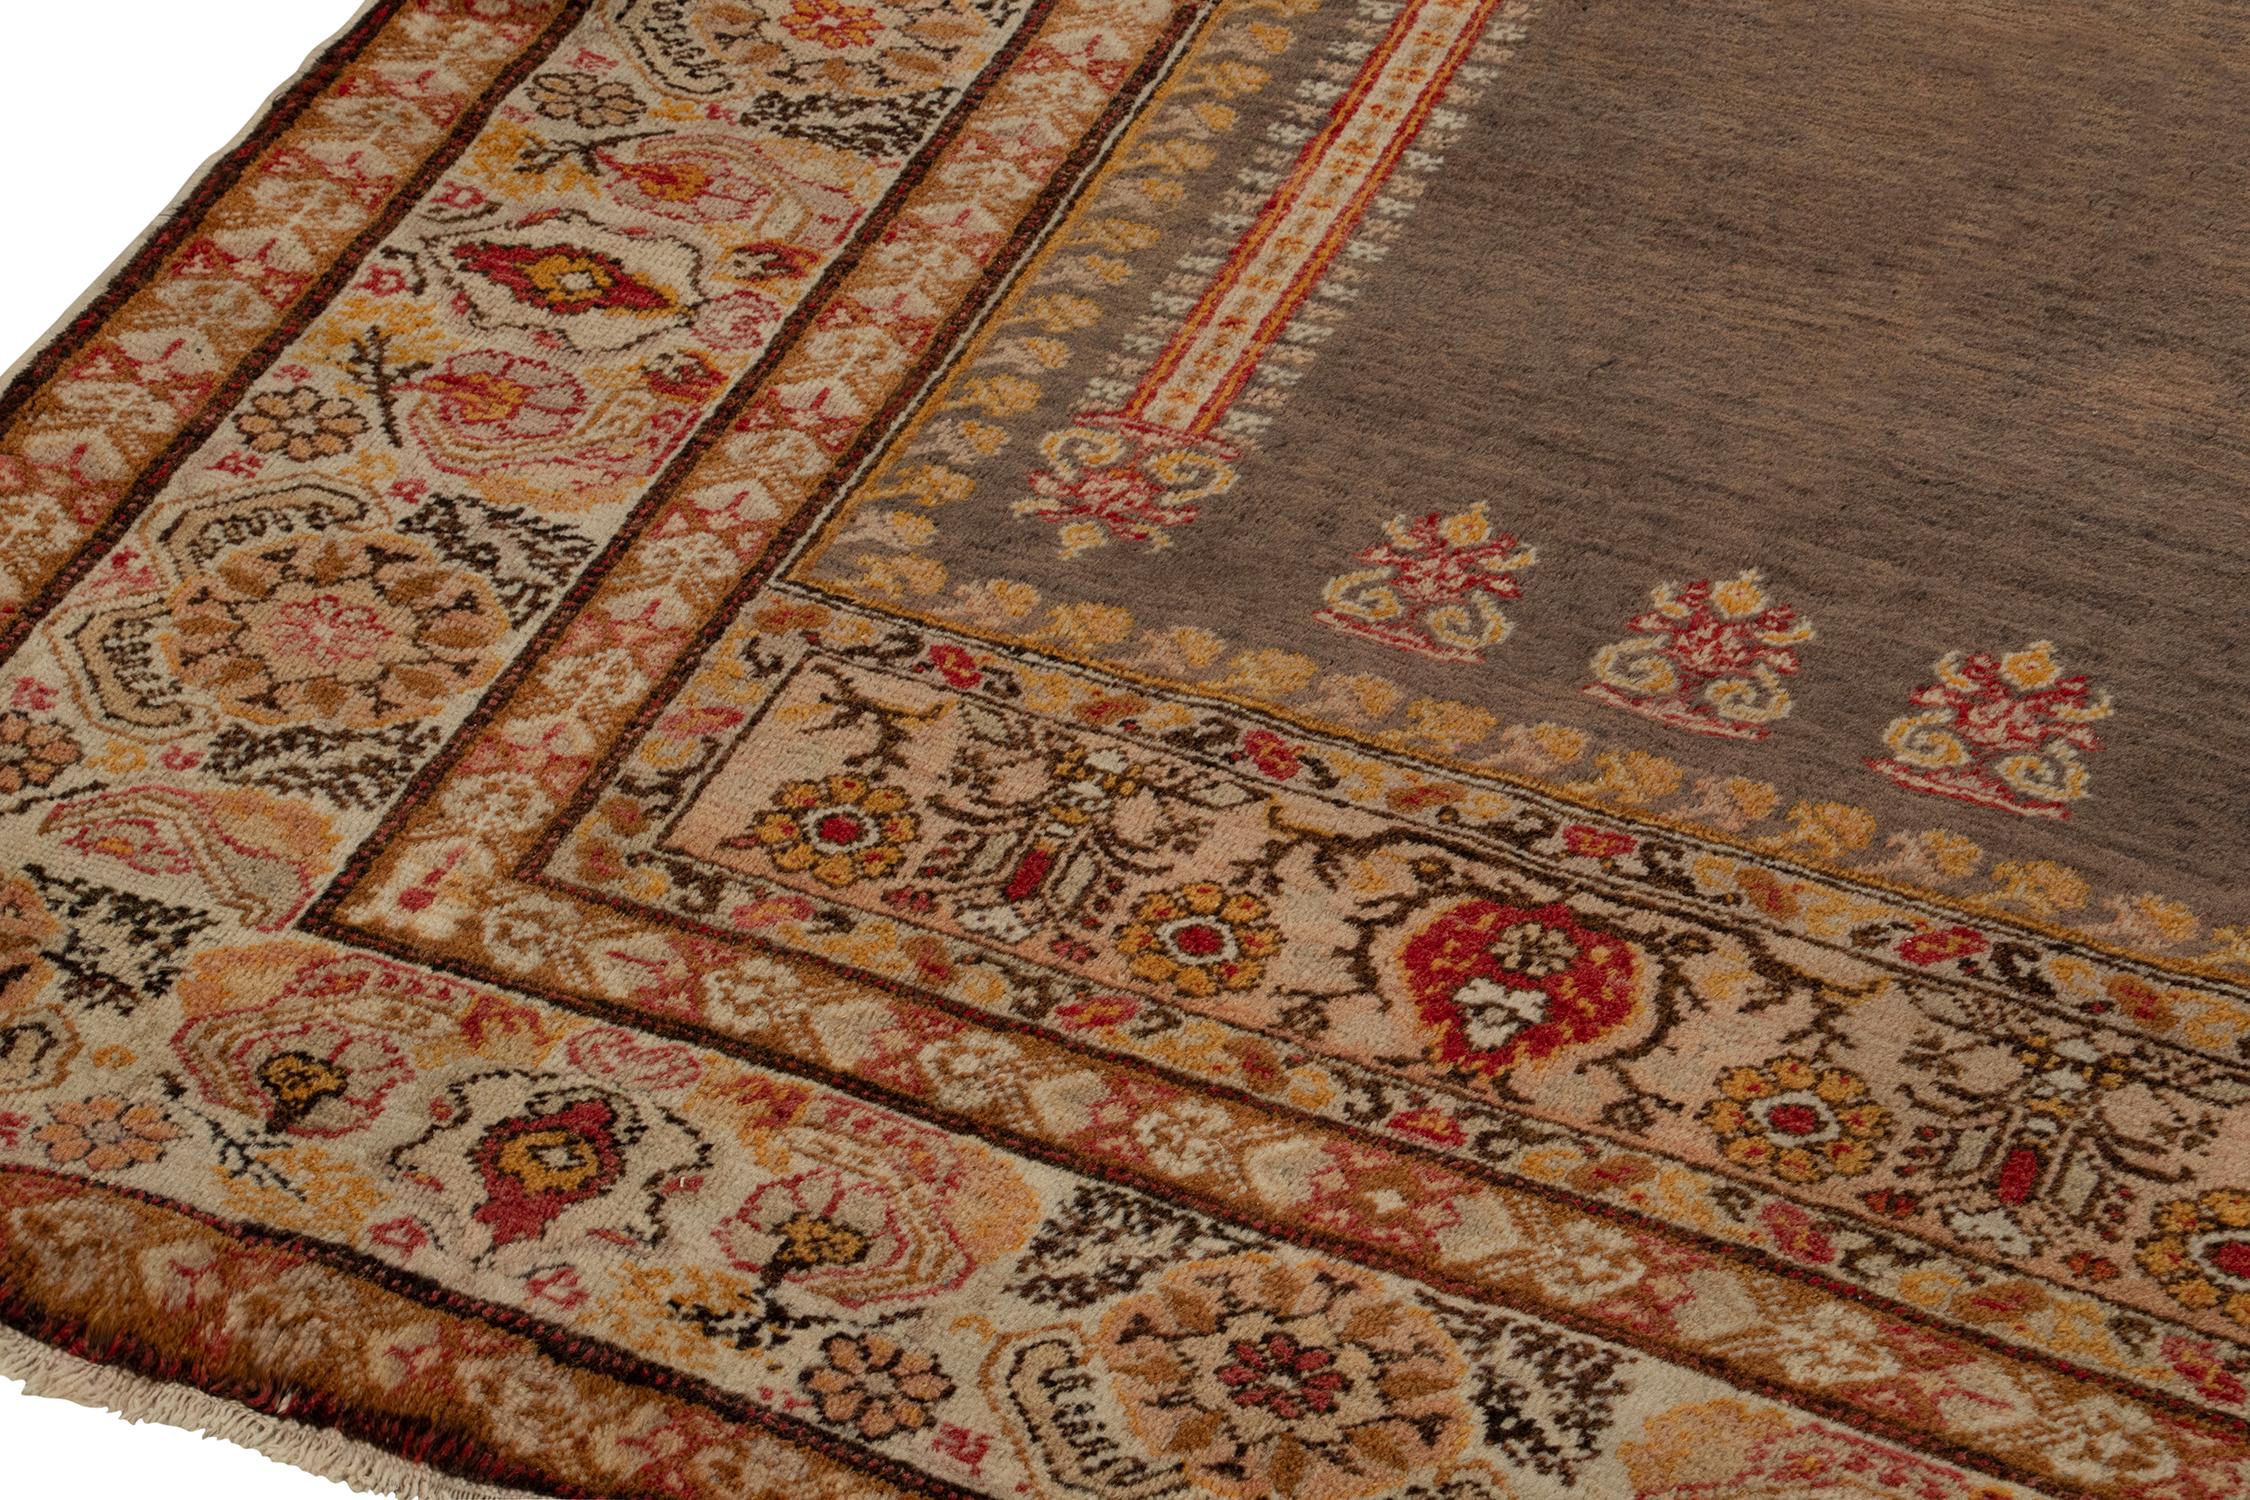 Antique Kayseri rug in Red, Gold & Beige Floral Patterns by Rug & Kilim In Good Condition For Sale In Long Island City, NY